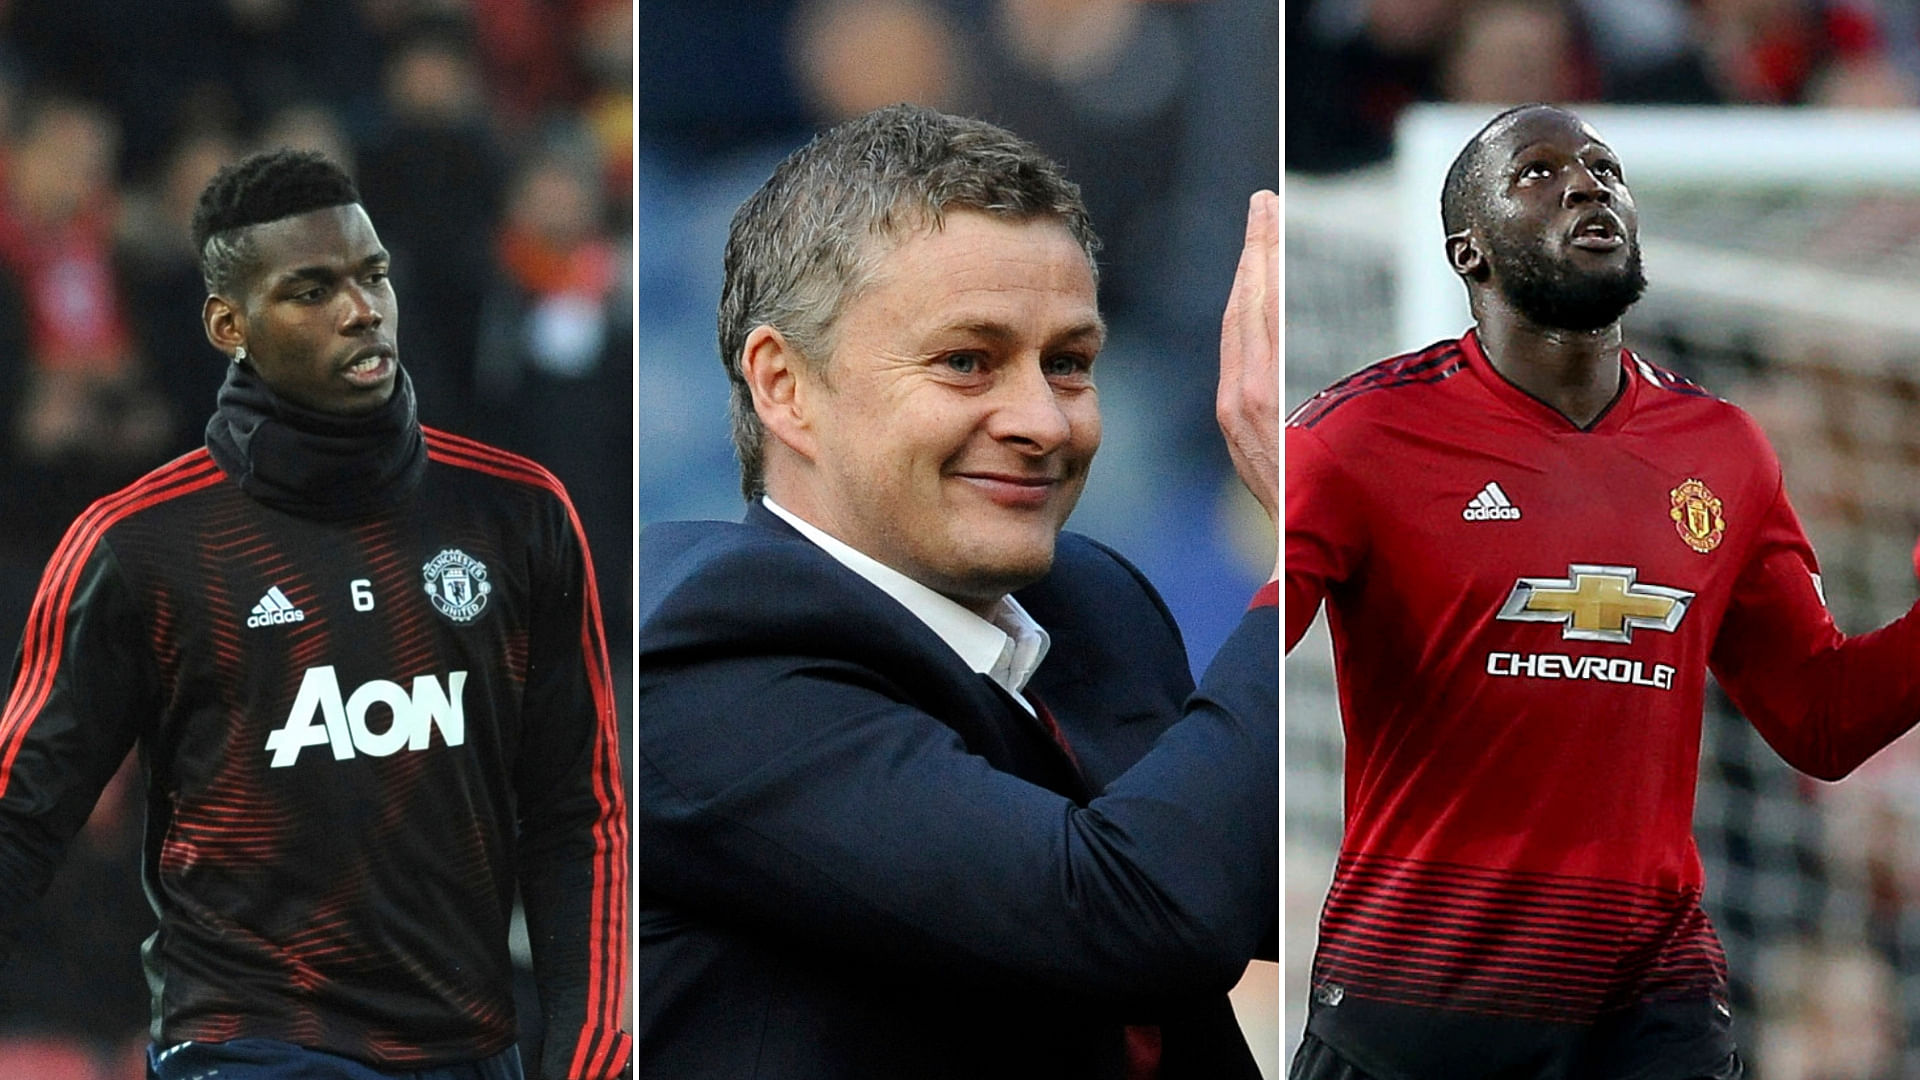 Ole Gunnar Solskjaer has landed his dream job as Manchester United manager after a whirlwind 24 hours.